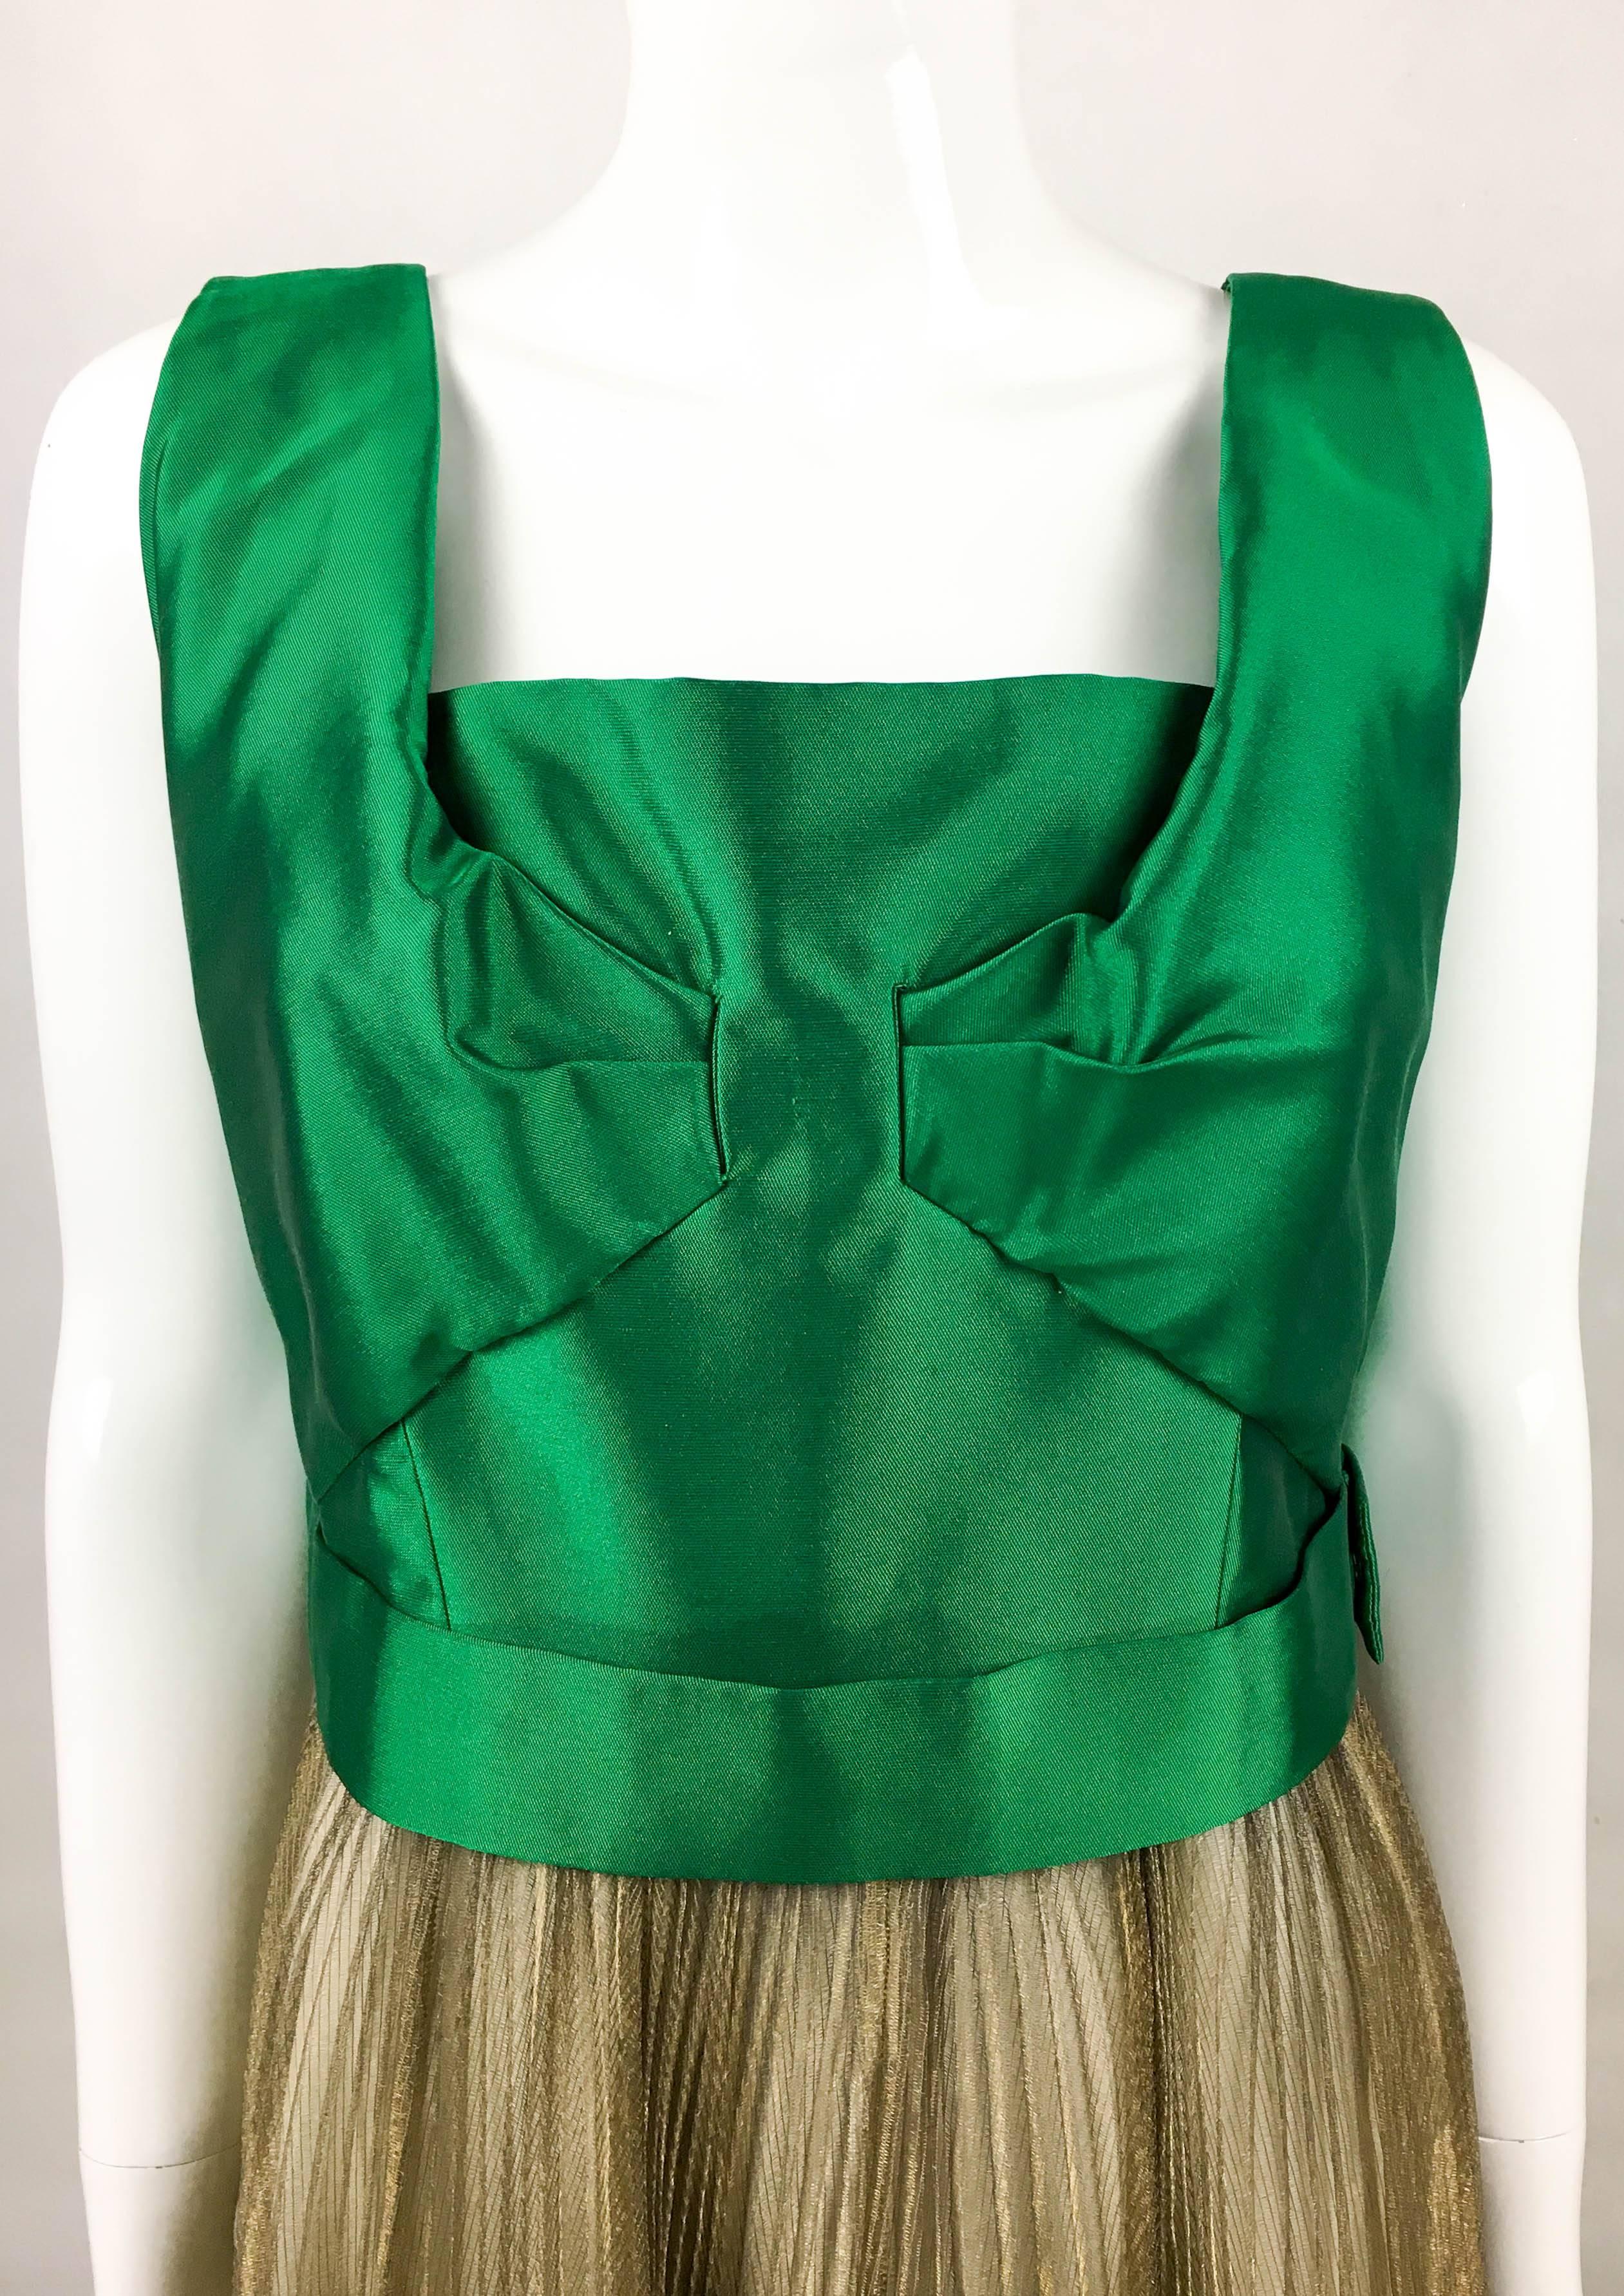 Lanvin Haute Couture Green Gazar and Gold Lame Pleated Gown, early 1960s For Sale 3